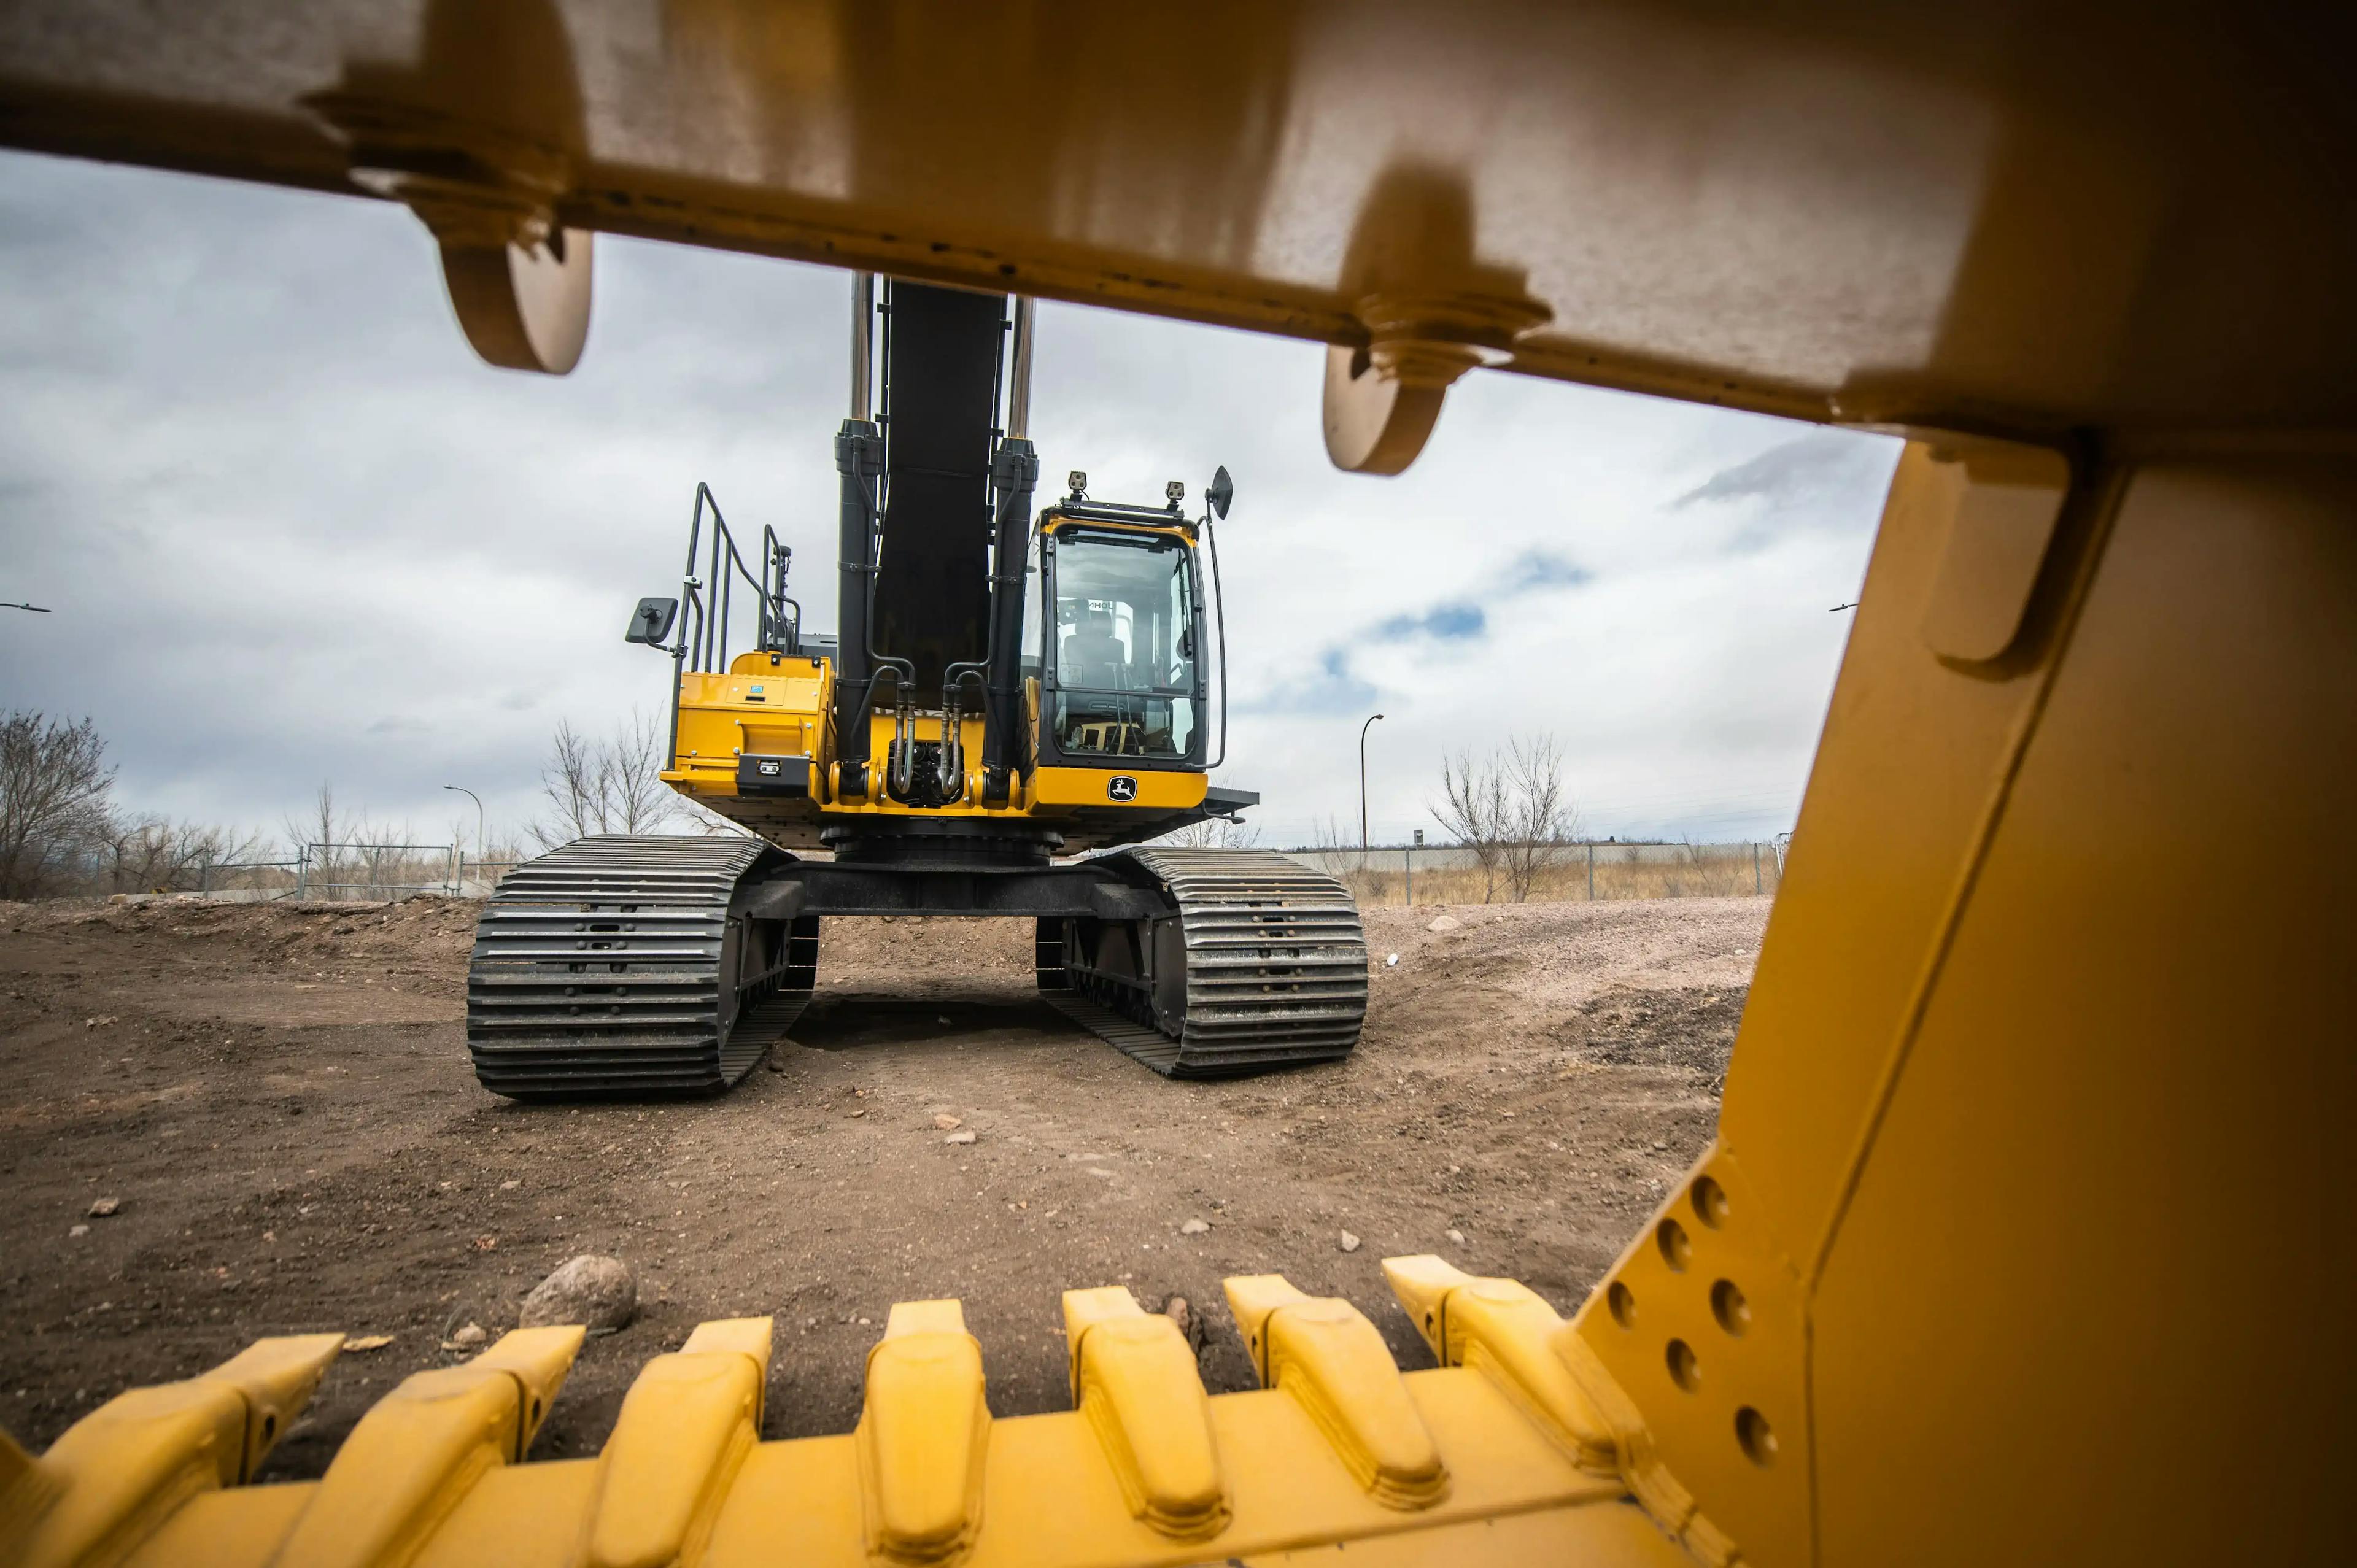 4Rivers Equipment to specialize in construction, Ag side merges with 21st Century Equipment